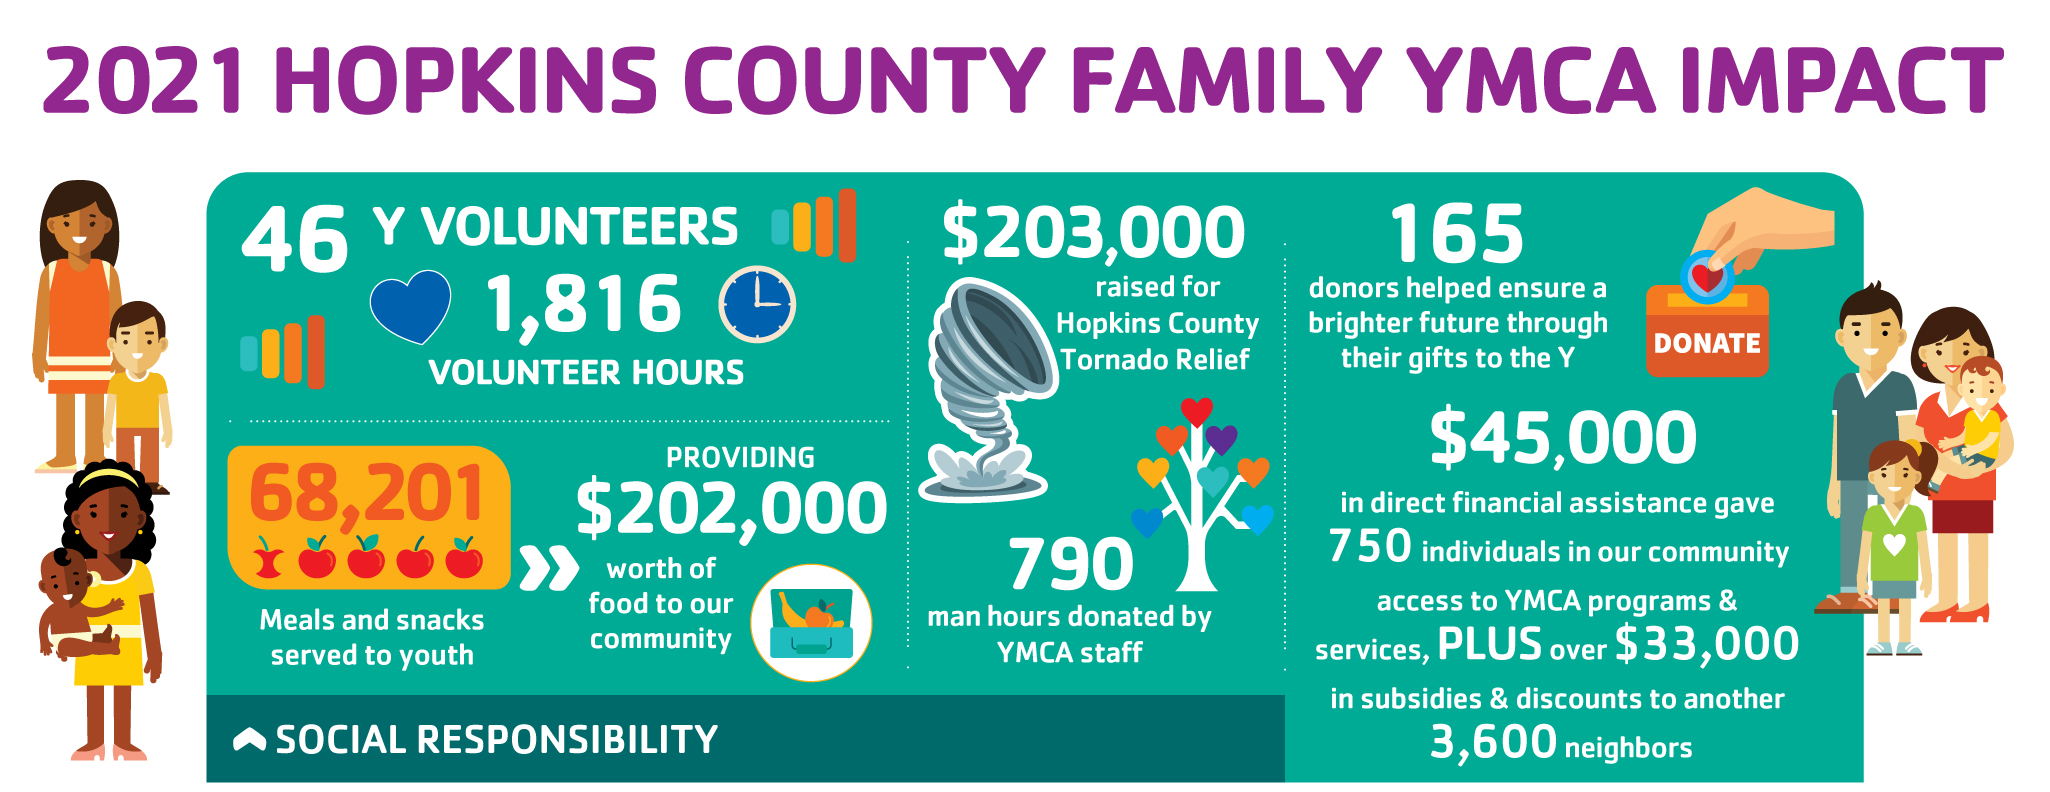 2021 Hopkins County Family YMCA Impact. 46 Volunteers, 203,000 dollars raised for tornado victims.  68,201 meals and snacks served to youth. Please contact us for full details.